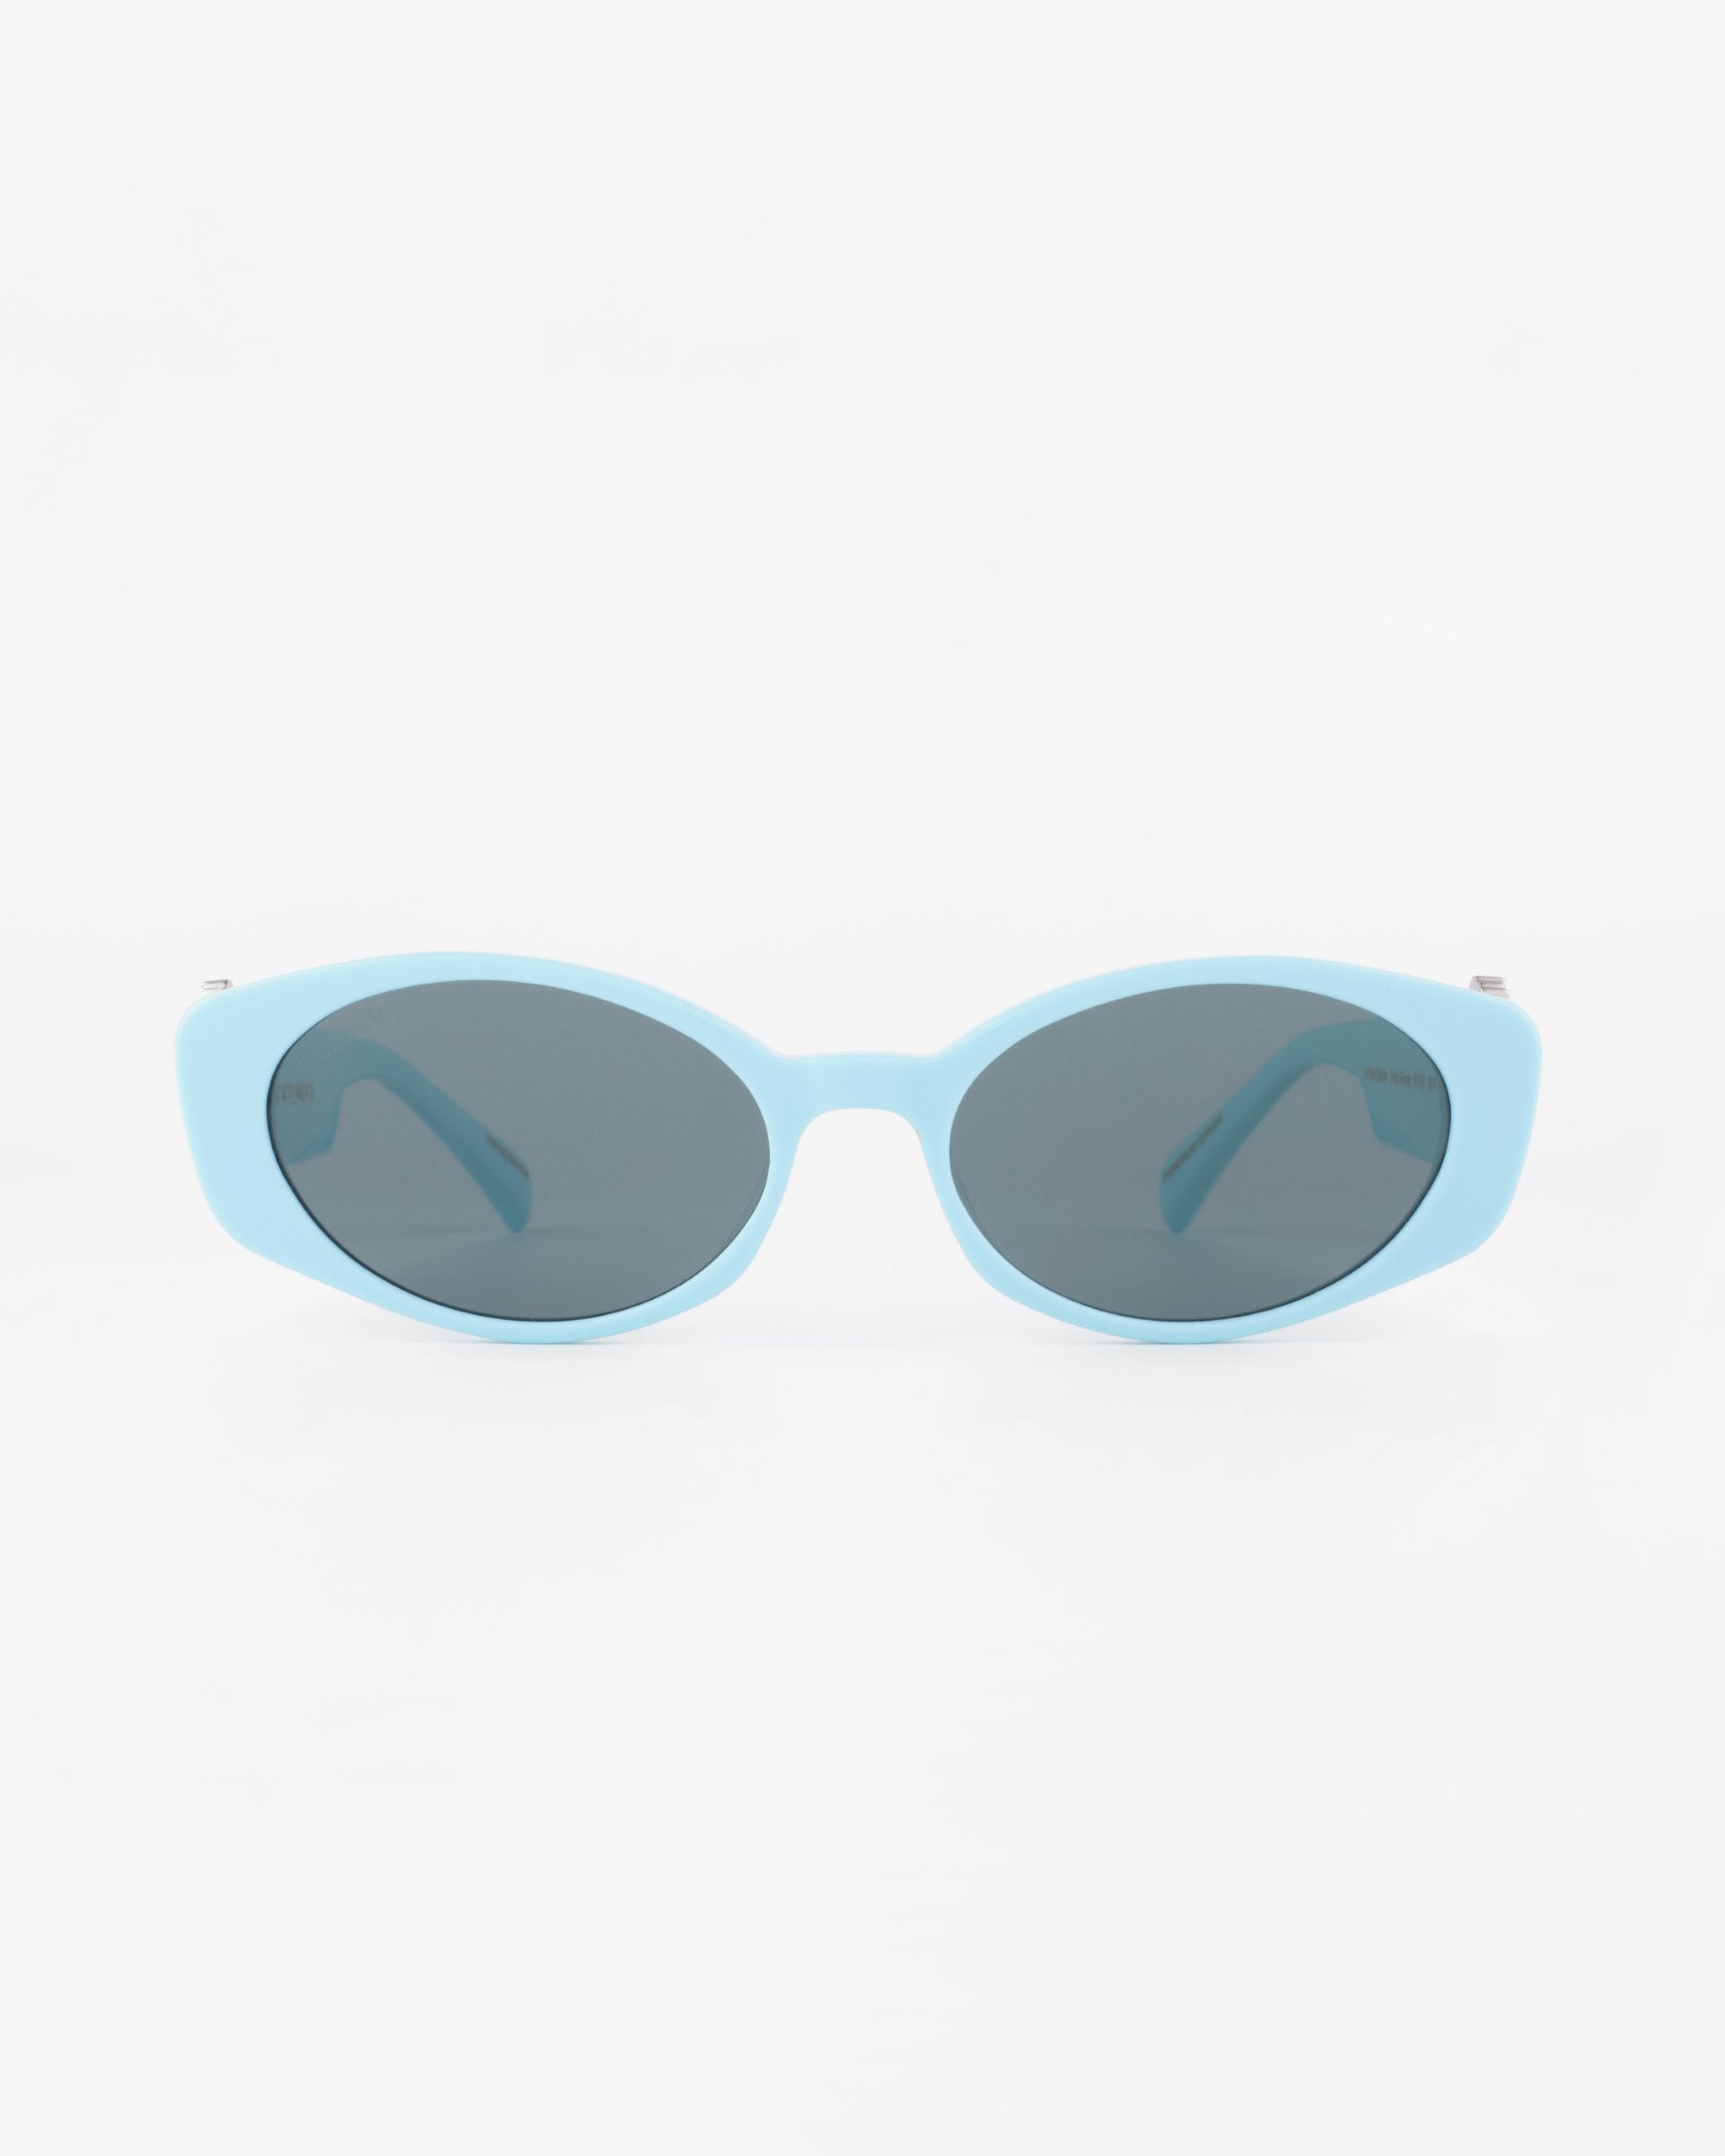 A pair of light blue oval sunglasses with dark tinted, ultra-lightweight nylon lenses offering 100% UVA &amp; UVB protection. The background is plain white, making the For Art&#39;s Sake® Frida Portrait sunglasses the focal point of the image.